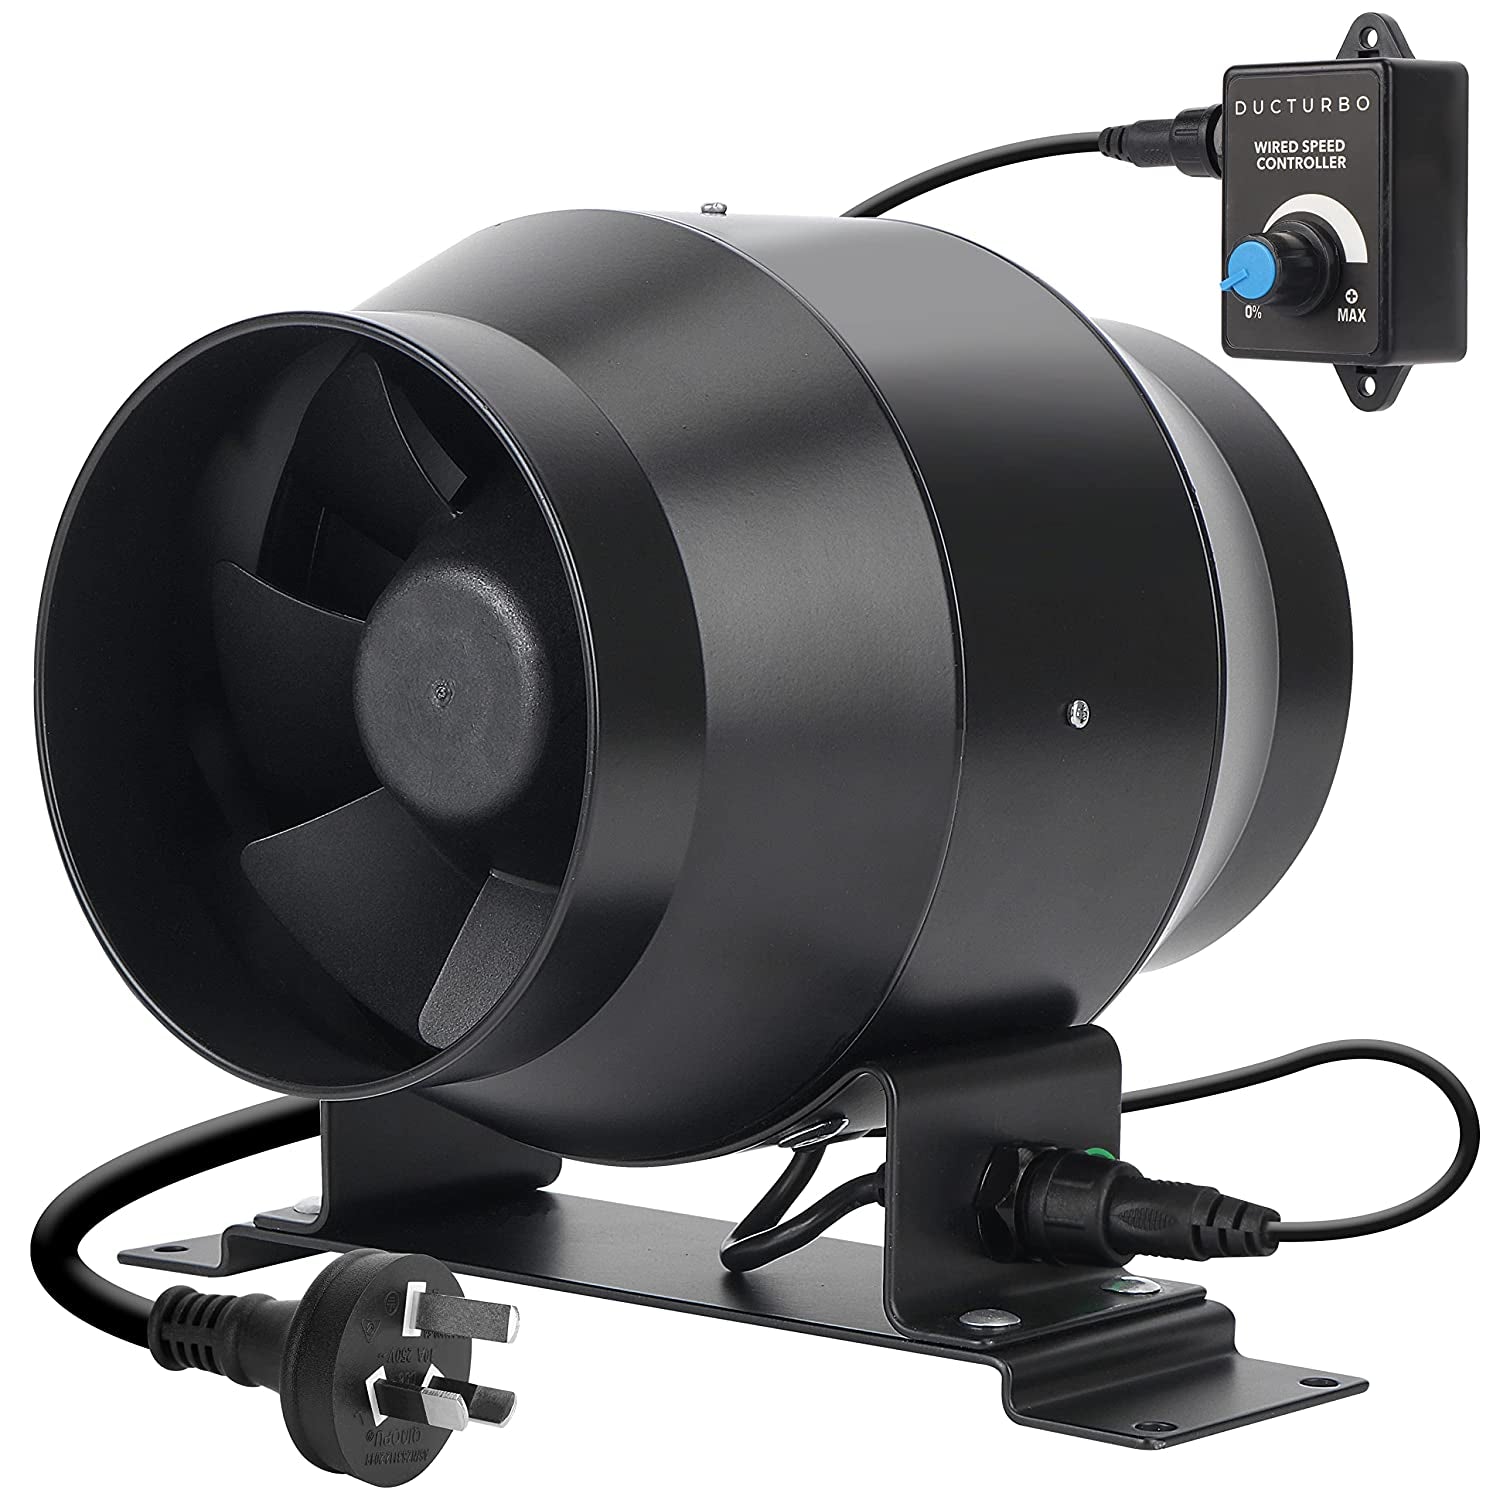 DUCTURBO, DUCTURBO 4 Inch Inline Duct Fans, 160 CFM Ventilation Exhaust Fan Ideal for Indoor Heating Cooling Transfer or Grow Tents Air Boosting, with Variable Speed Controller